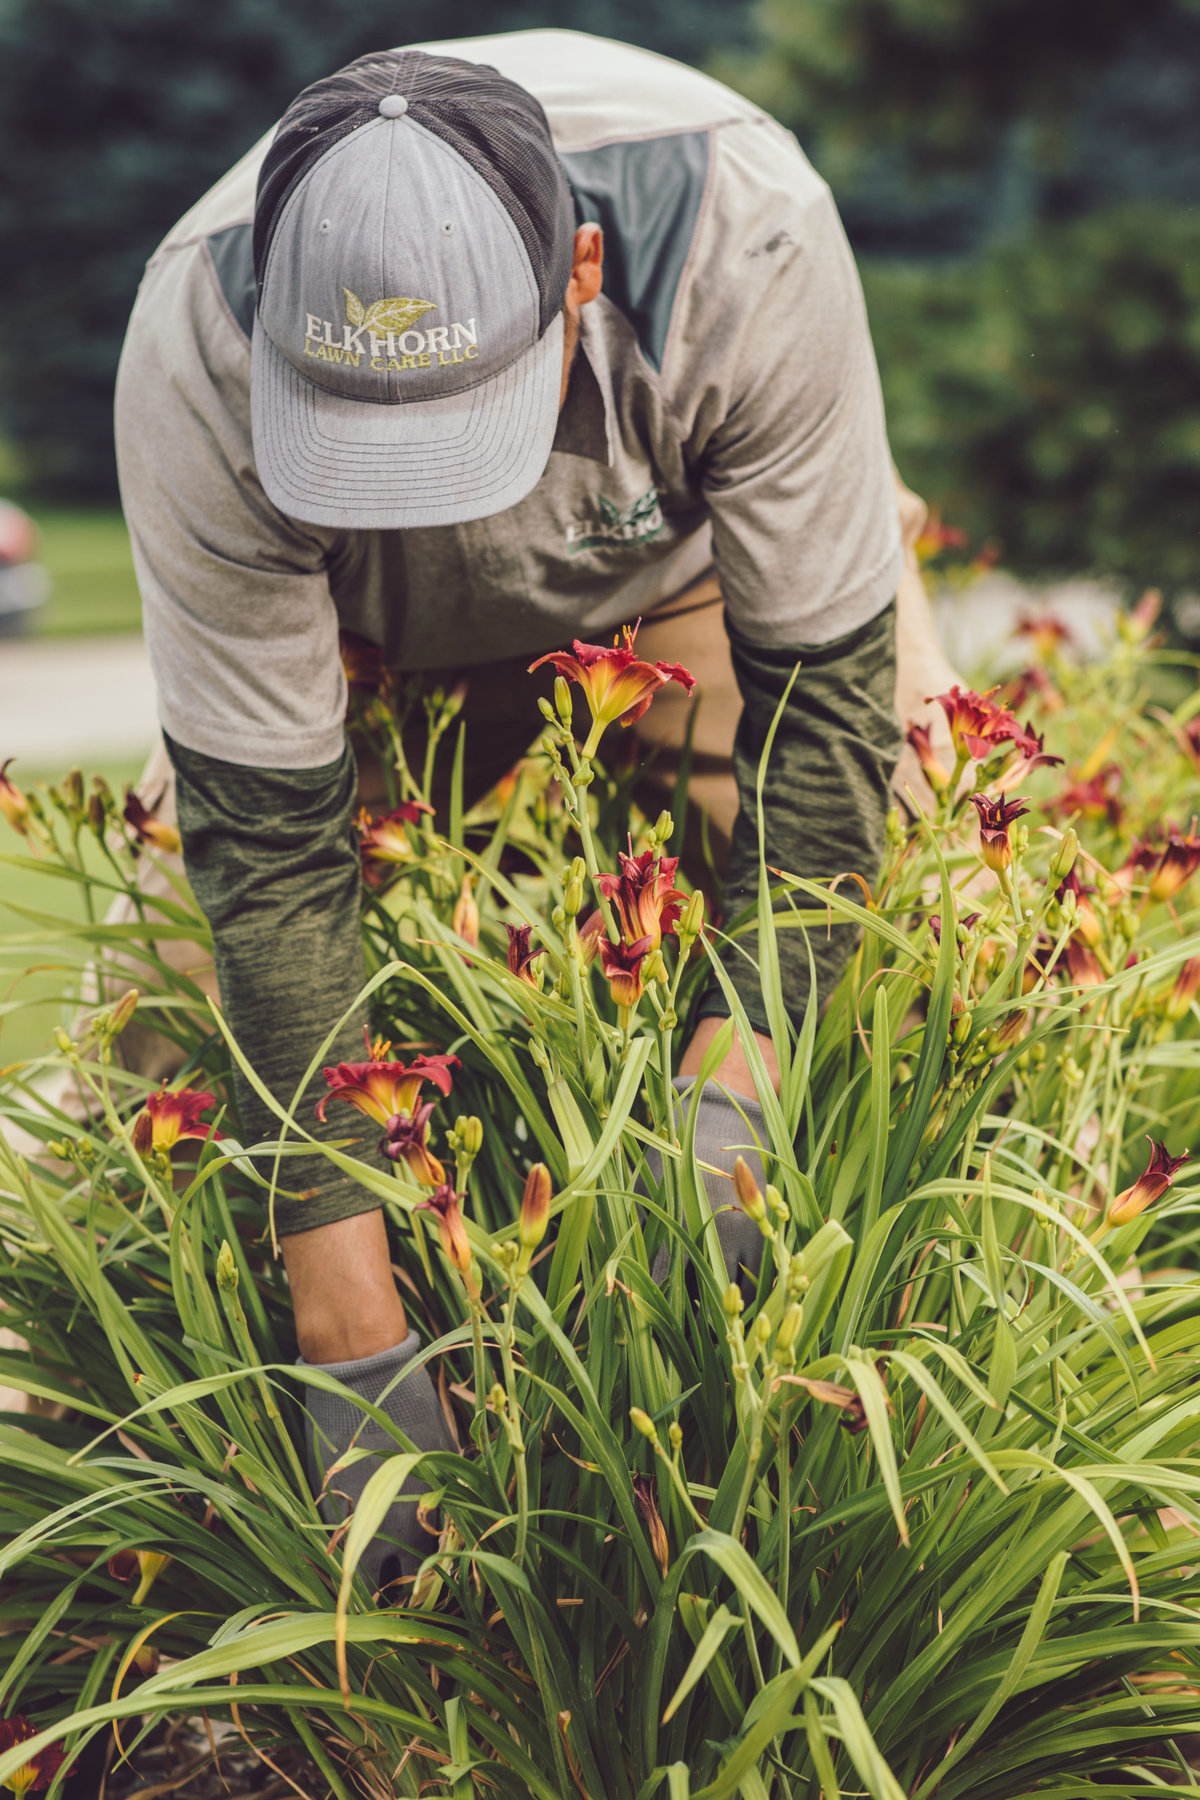 Landscaping Service Omaha NE | Lawn Landscaping Company